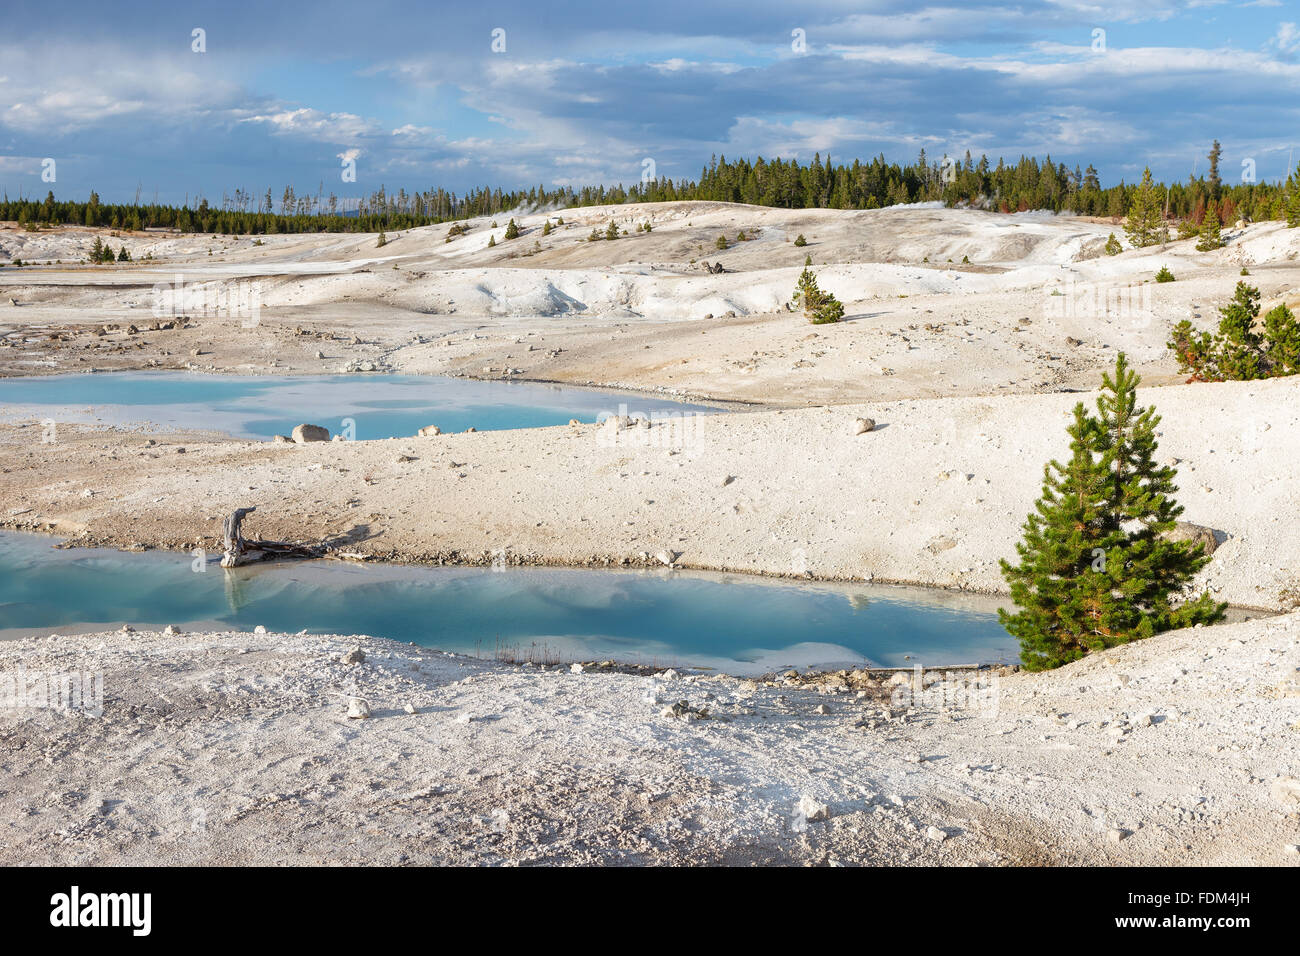 Porcelain Basin, in the Norris Geyser Basin, Yellowstone National Park, Wyomin, United States of America. Stock Photo